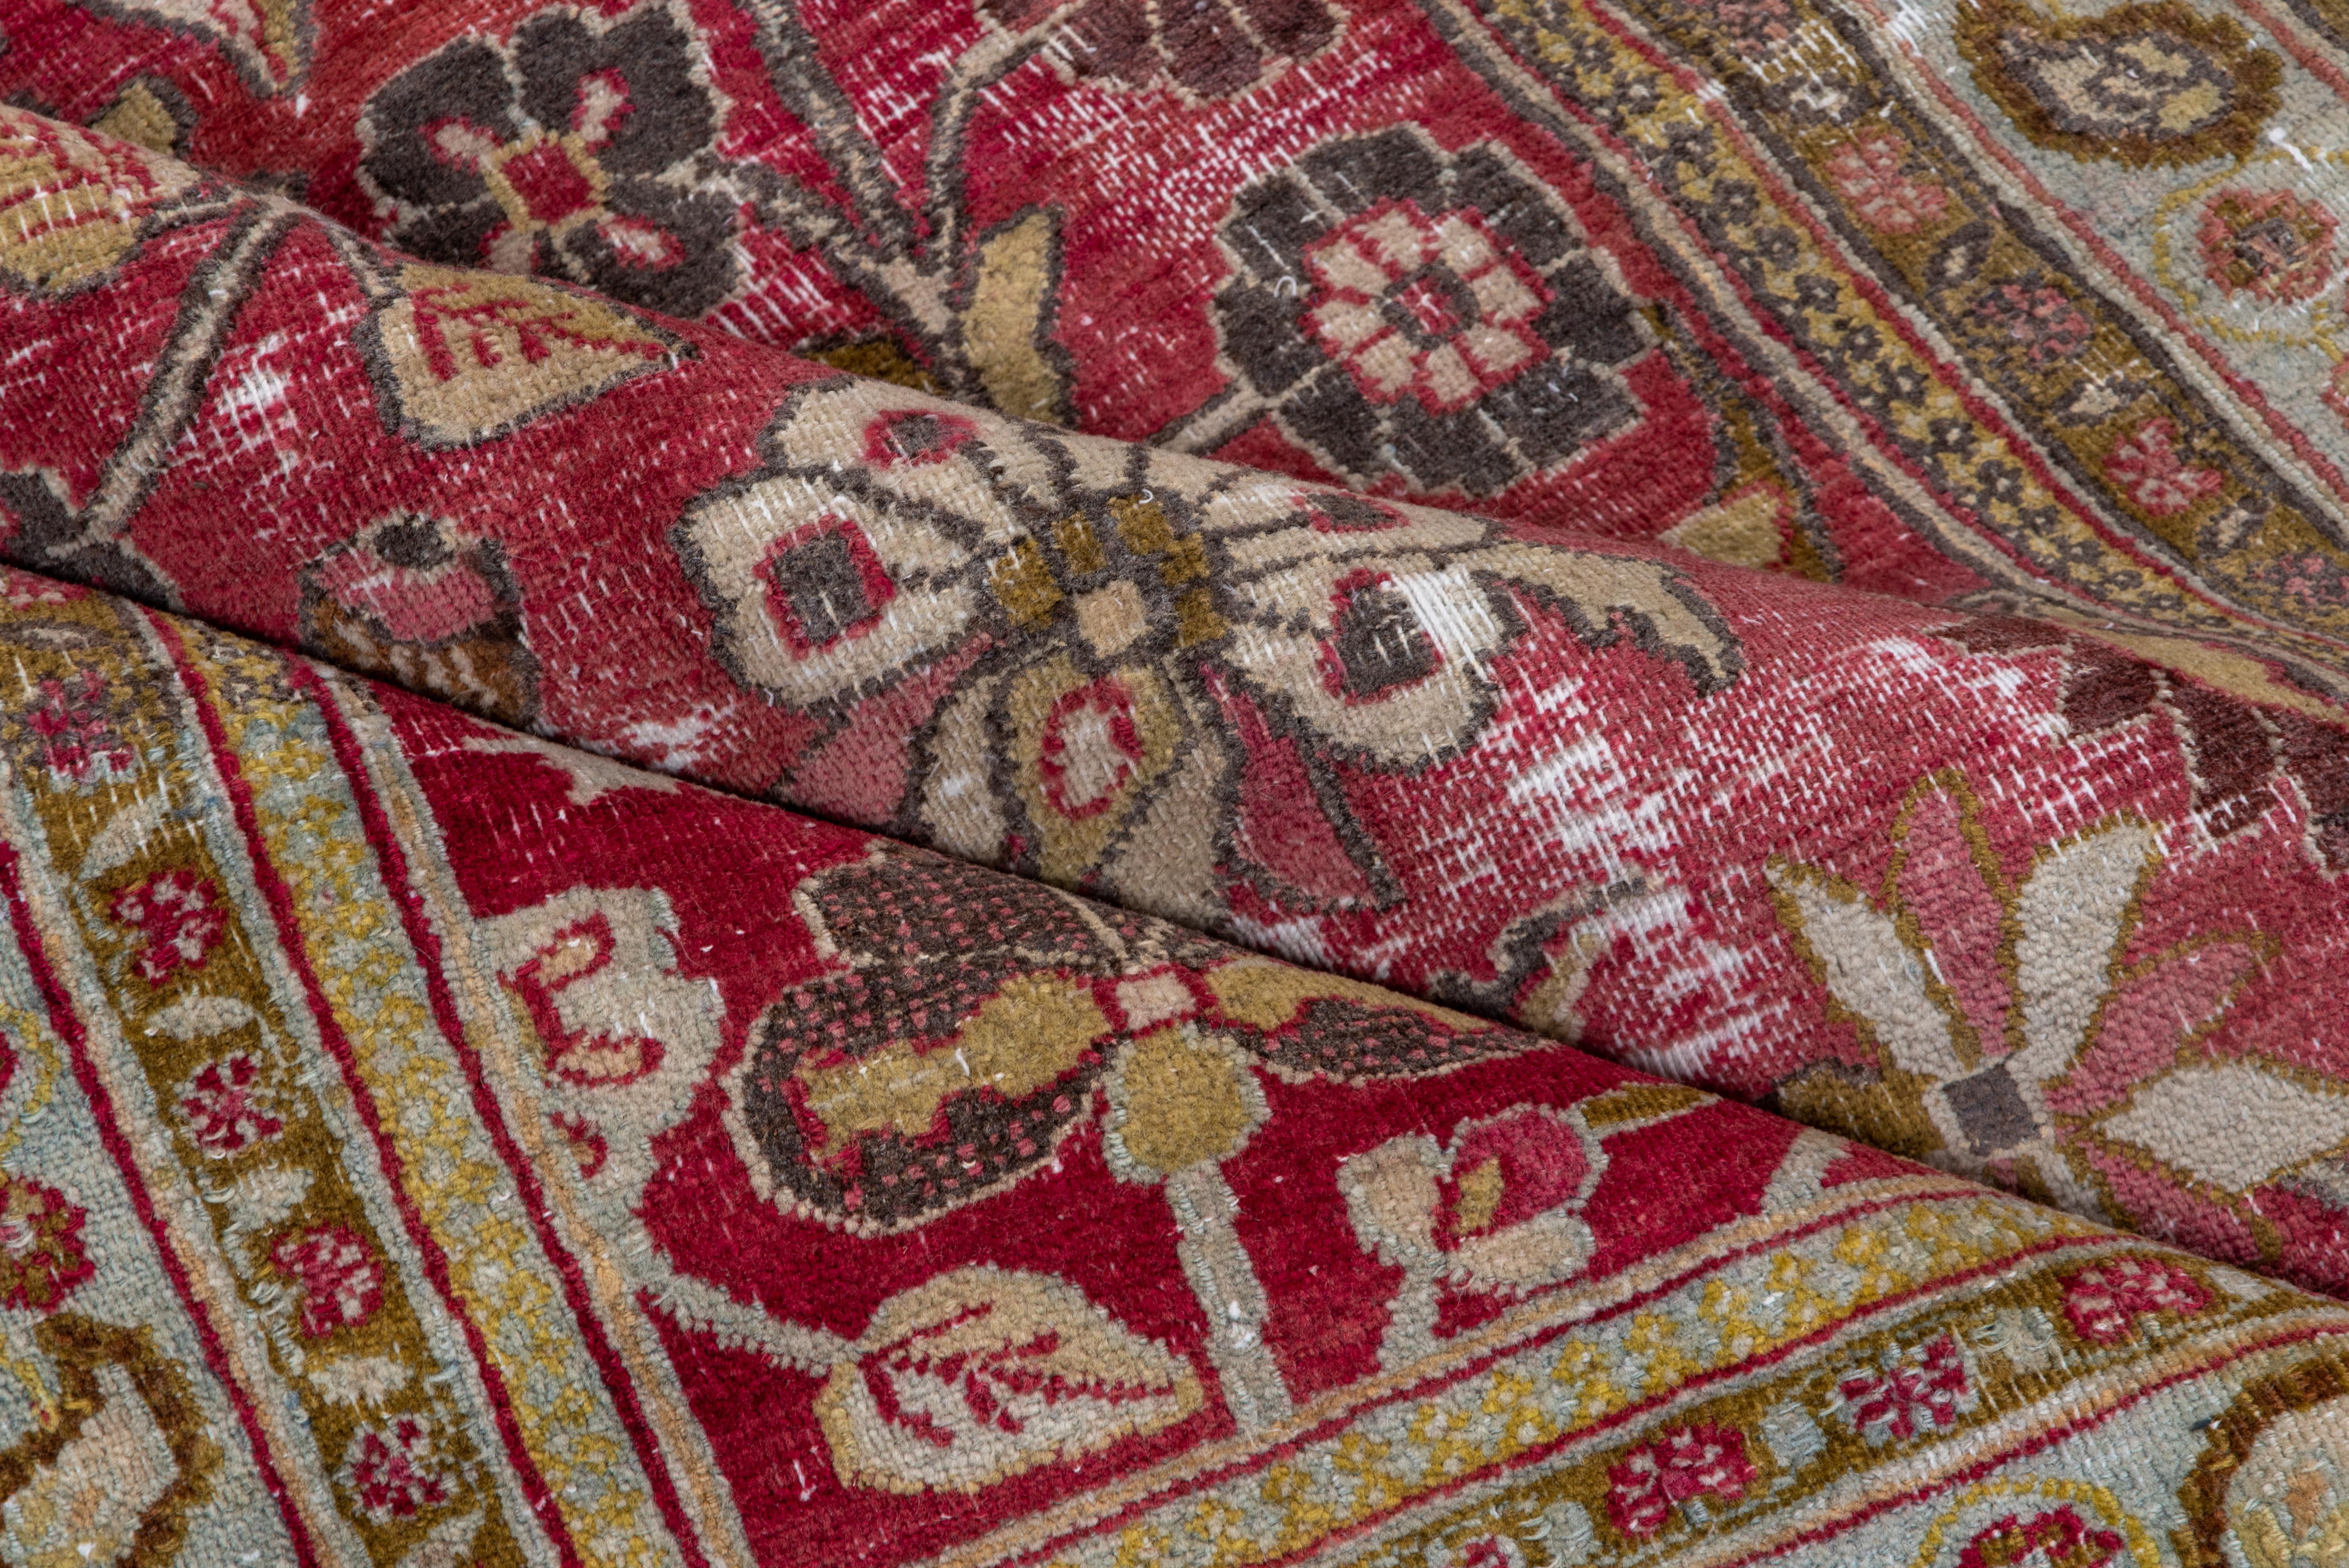 Shabby Chic Persian Khorassan Rug, Raspberry Field, Seafoam & Olive Borders In Good Condition For Sale In New York, NY